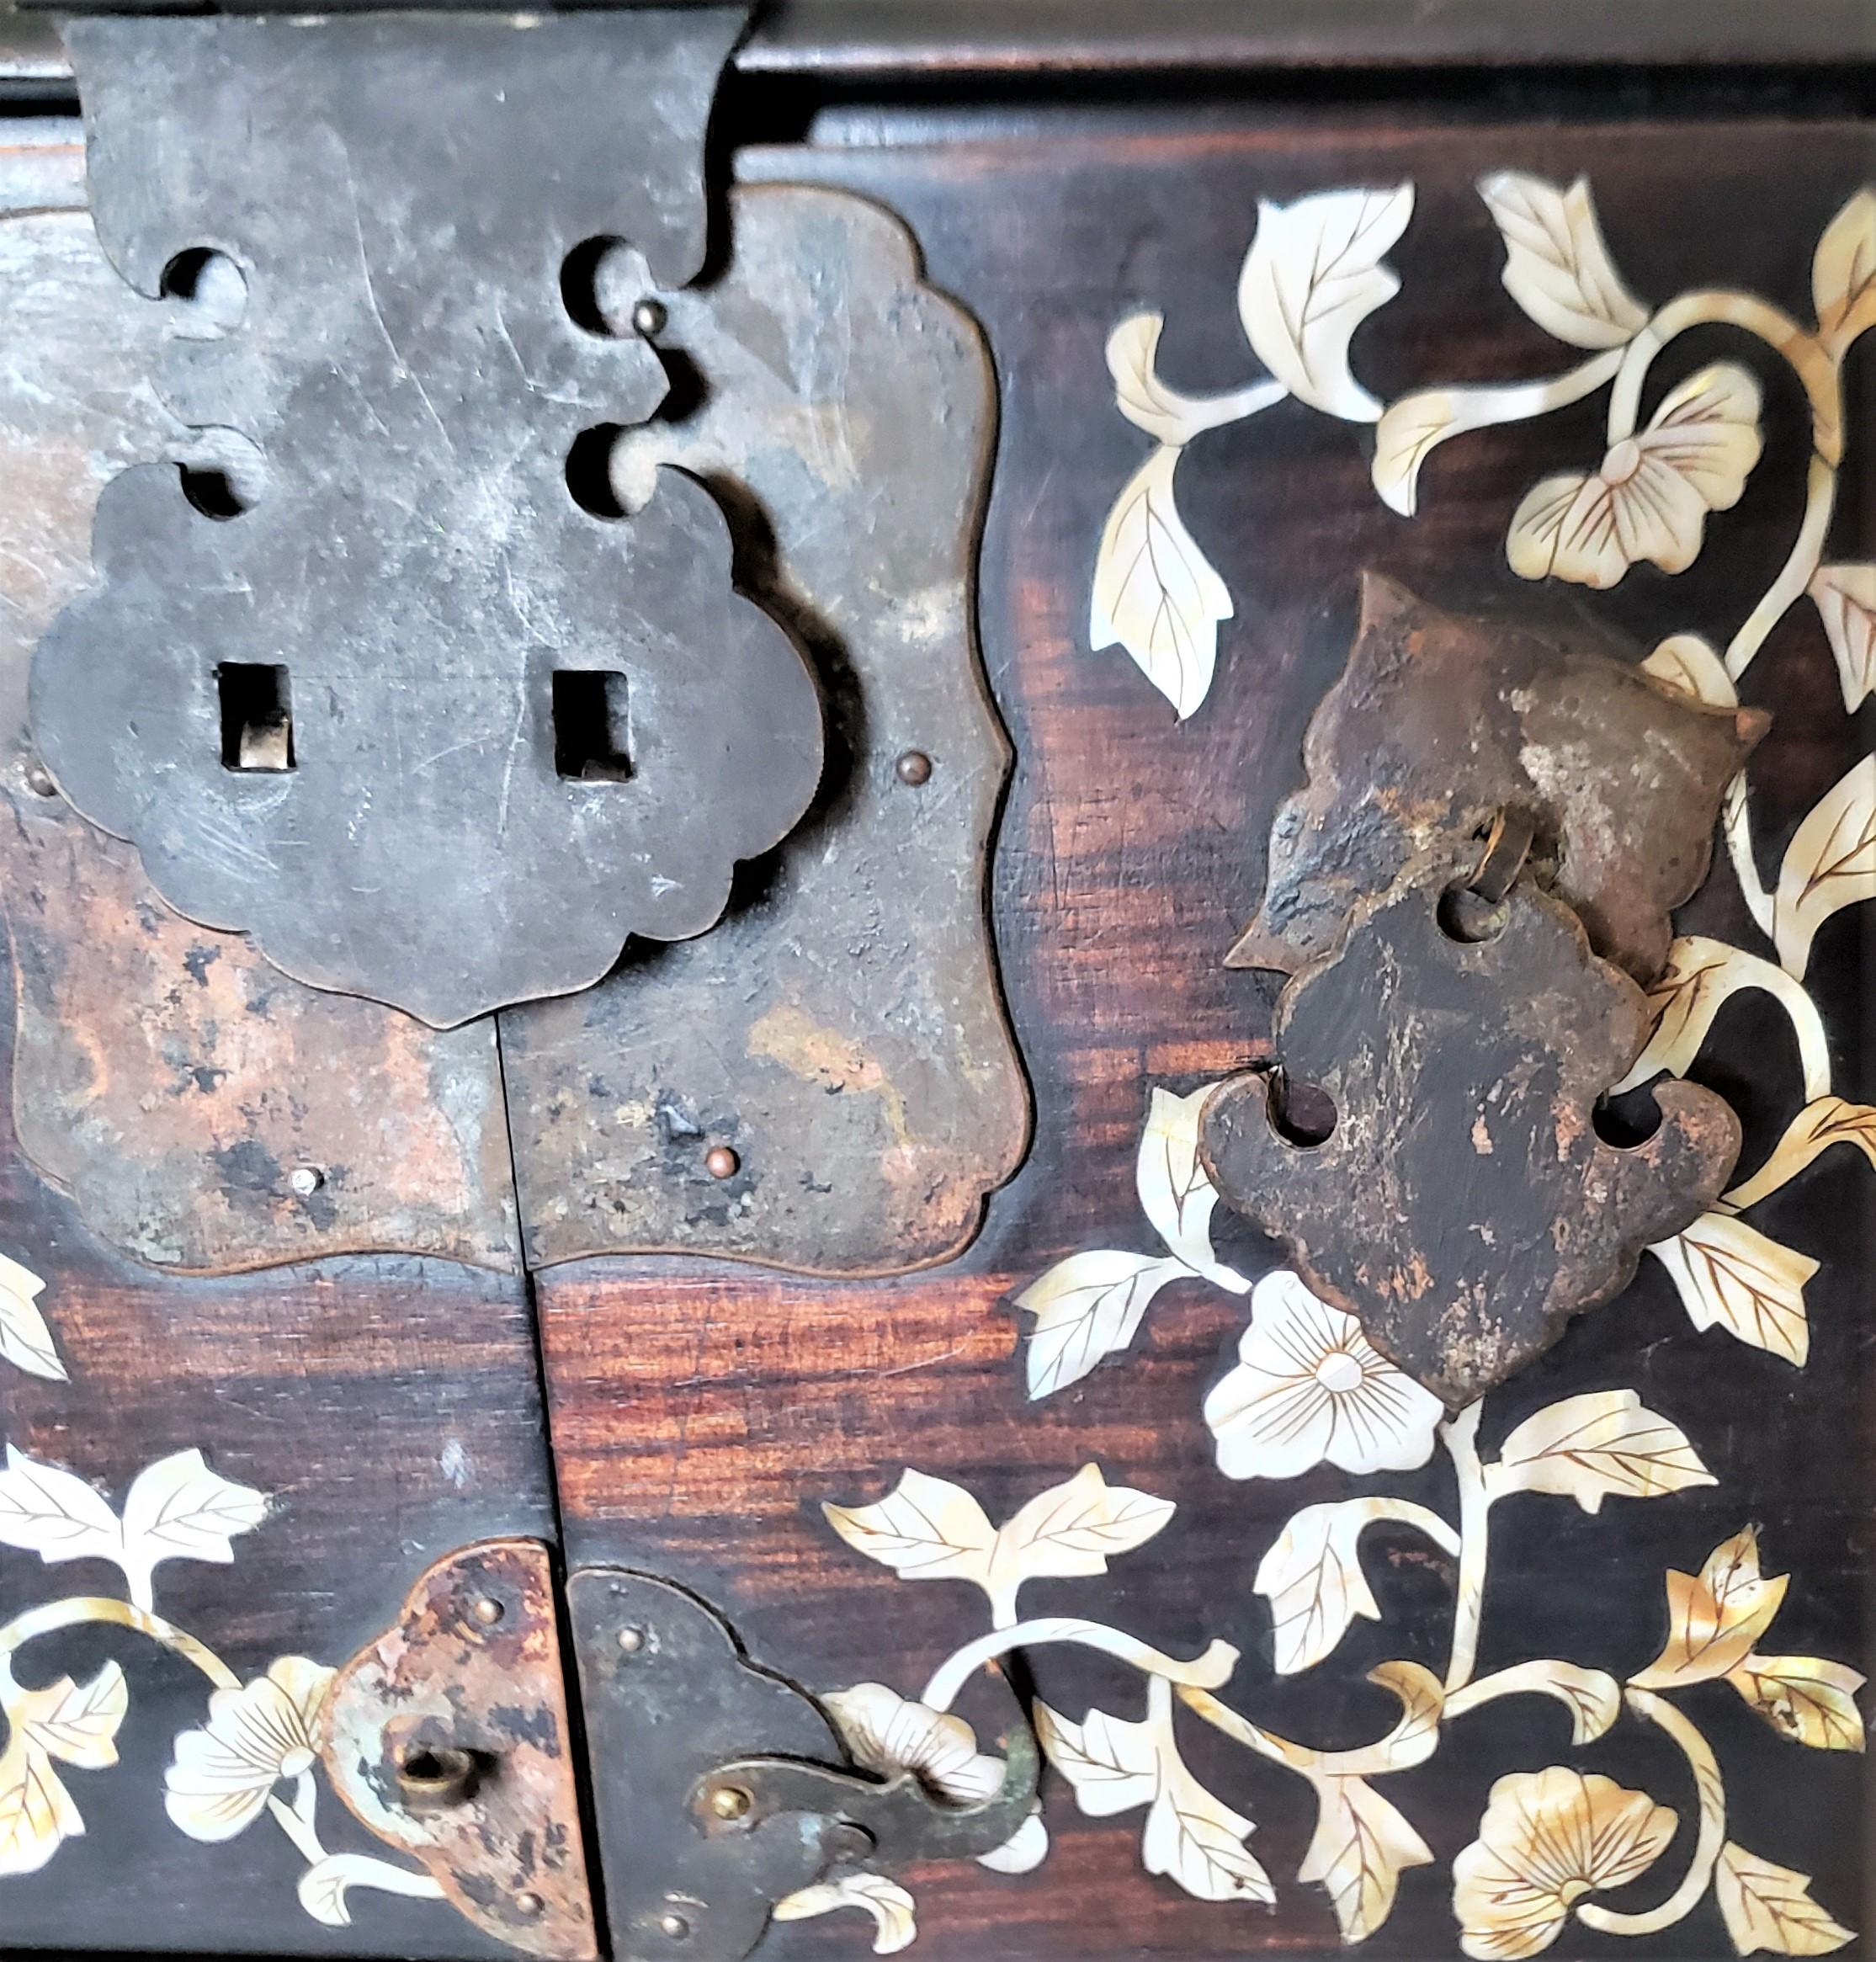 Antique Chinese Wooden Jewelry Box or Vanity Dresser Chest with Intricate Inlay In Good Condition For Sale In Hamilton, Ontario